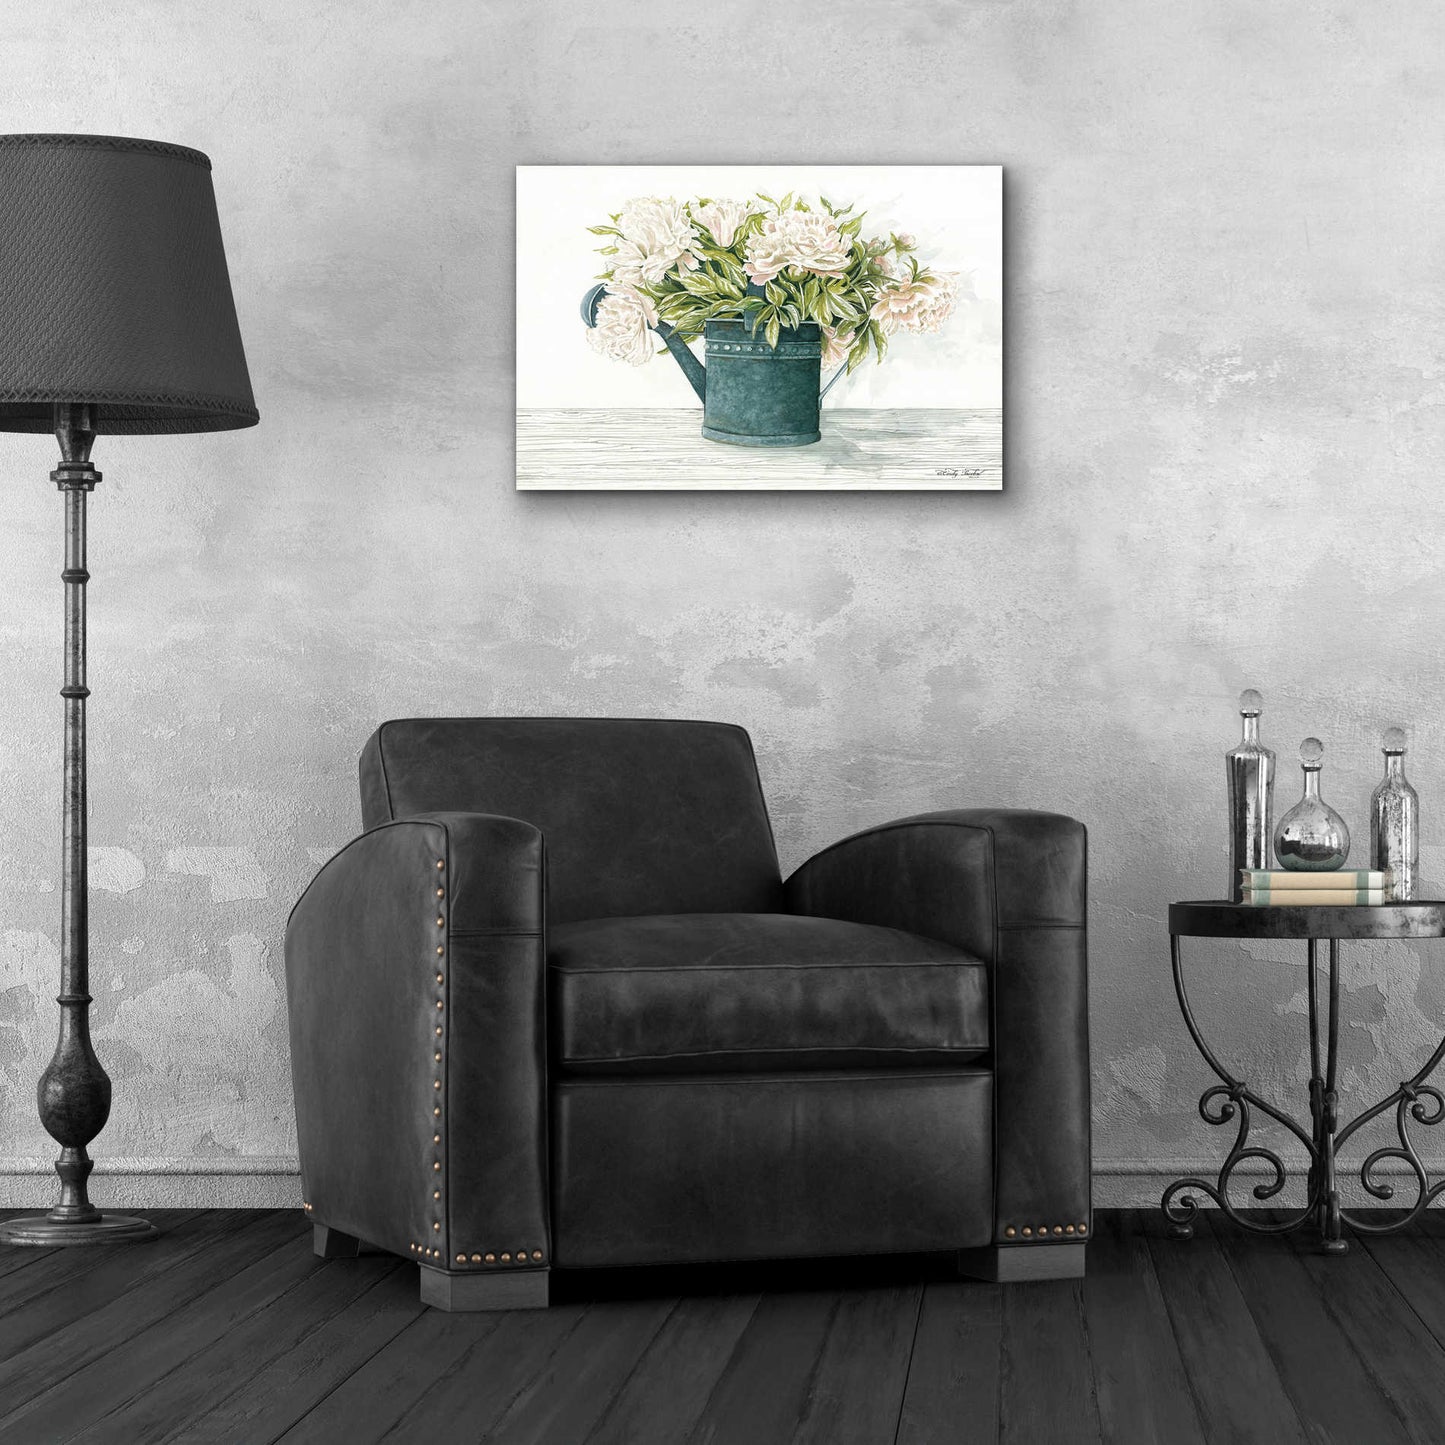 Epic Art 'Galvanized Watering Can Peonies' by Cindy Jacobs, Acrylic Glass Wall Art,24x16